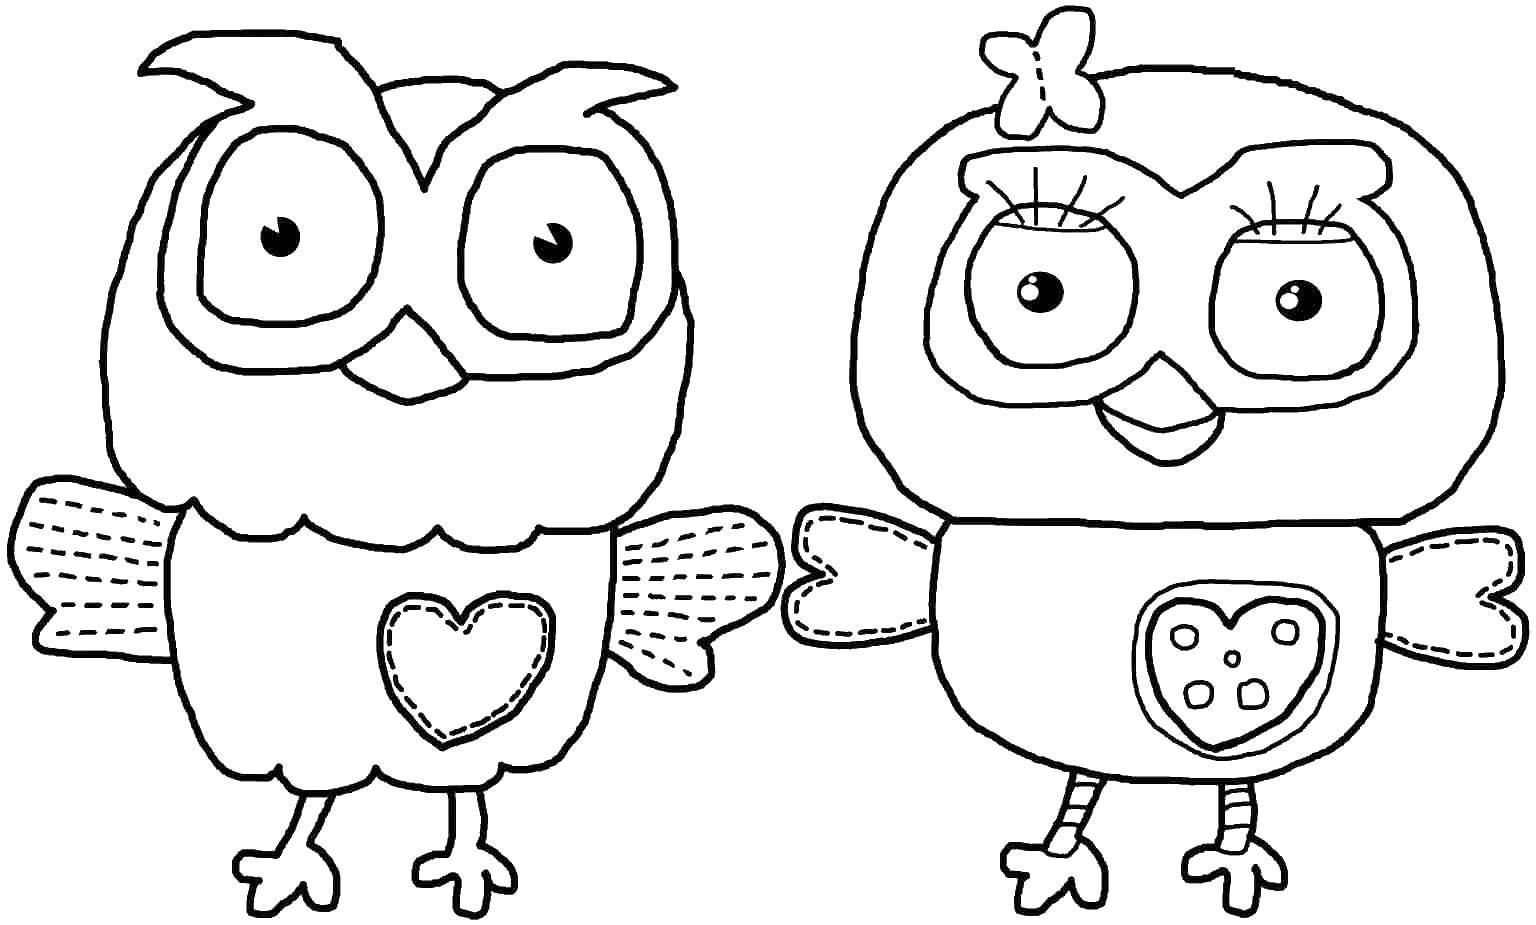 Coloring Two owls. Category coloring. Tags:  for kids, owls, birds.